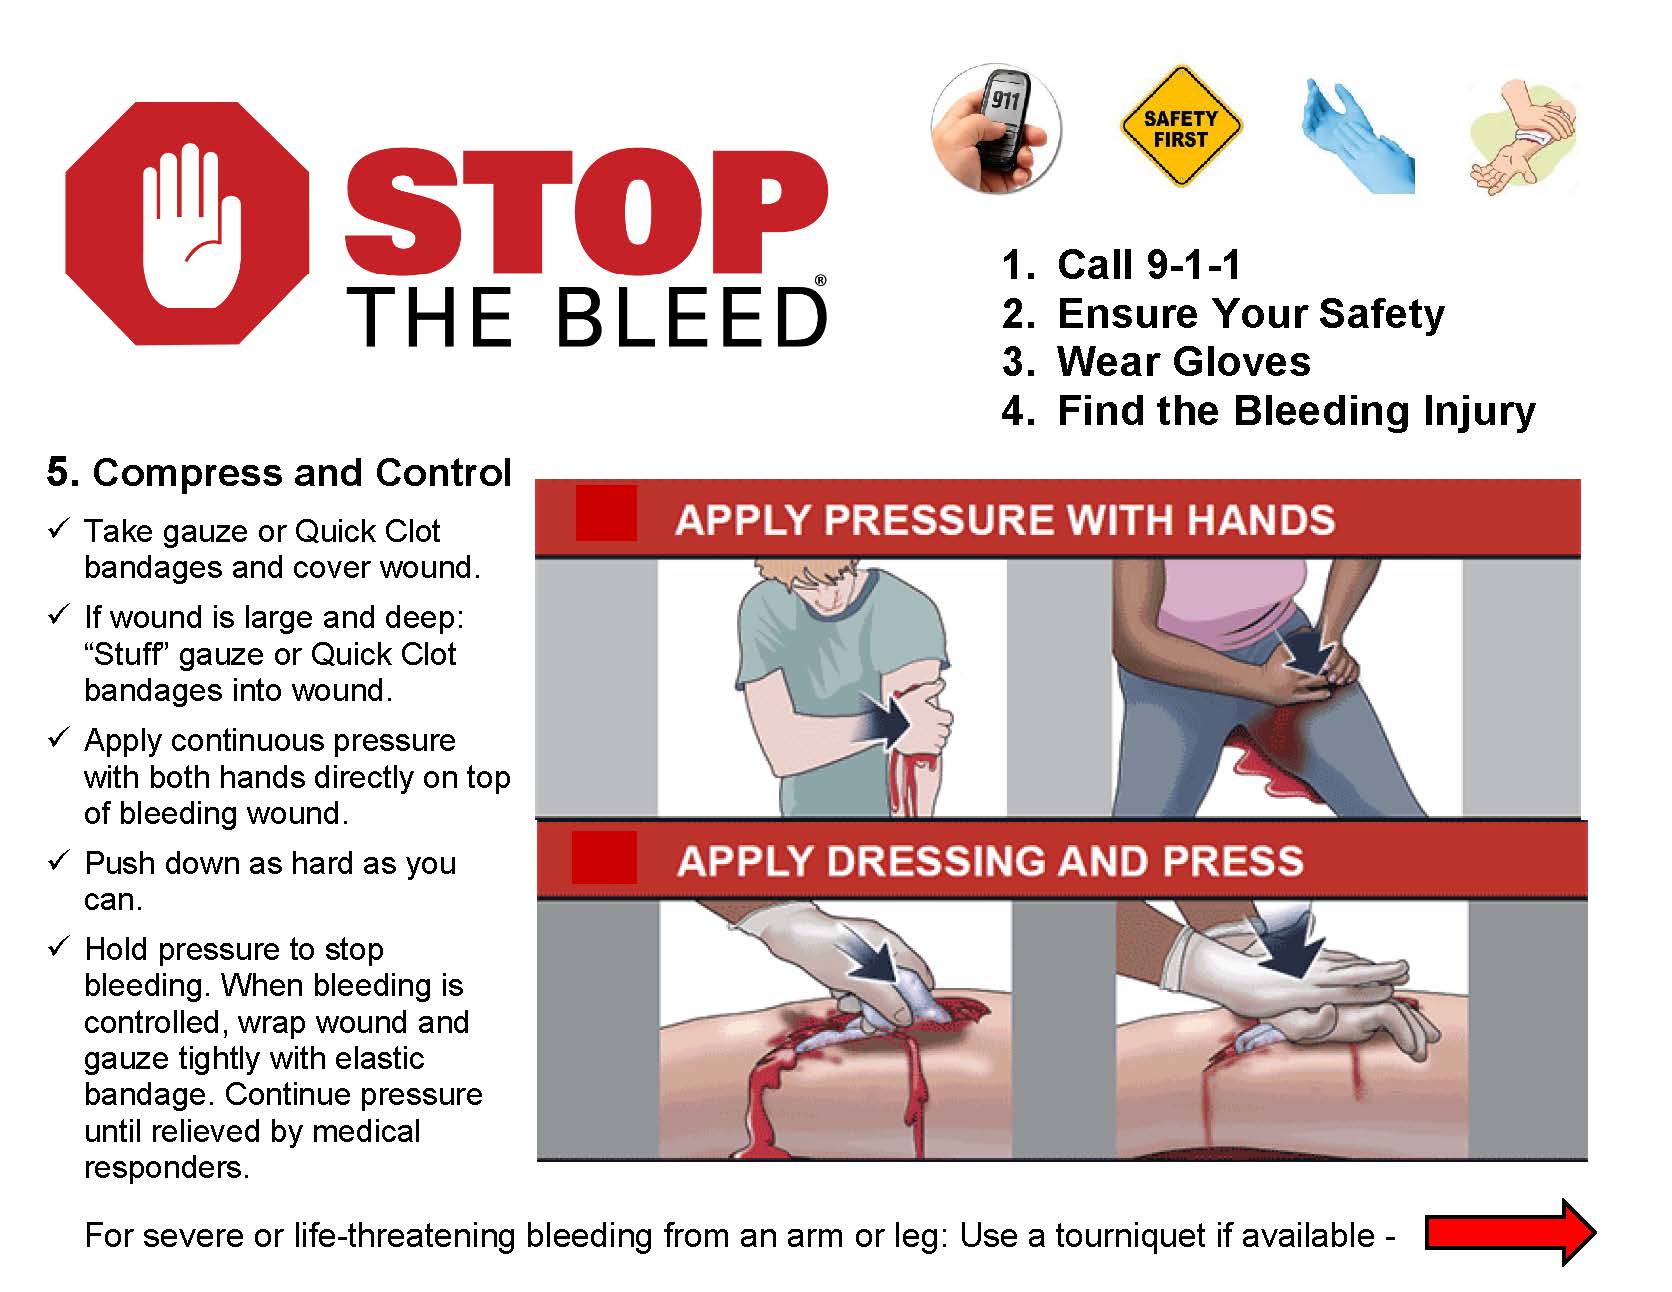 first page of compress and control pdf detailing gauzing wound, applying continuous pressure, and using tourniquet for severe bleeding